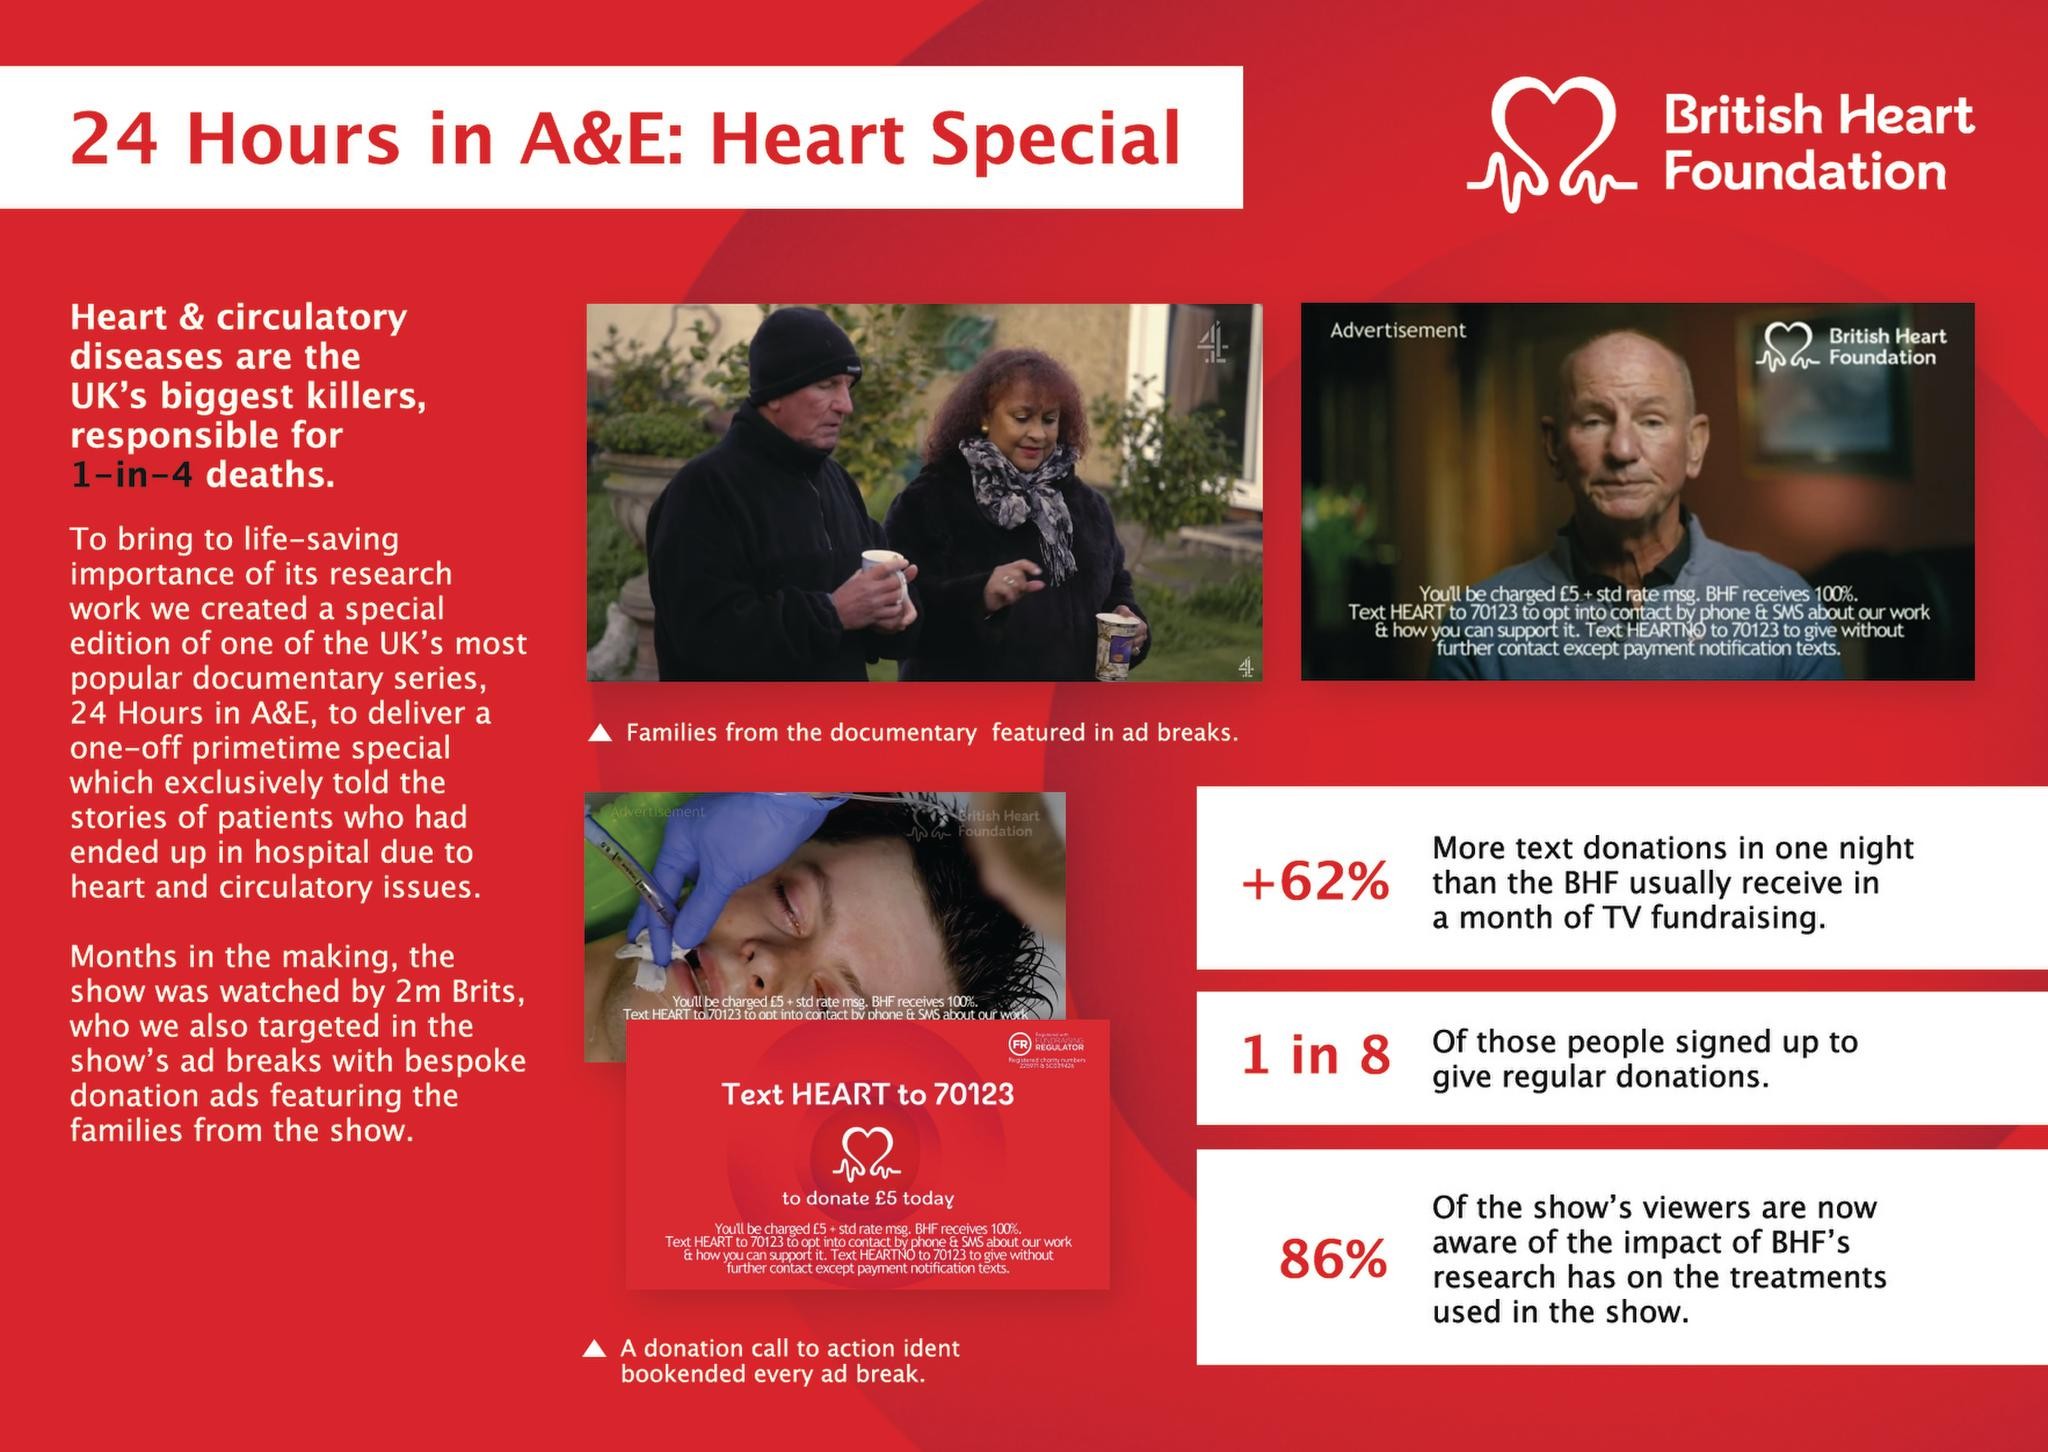 BHF 24 Hours in A&E: Heart Special